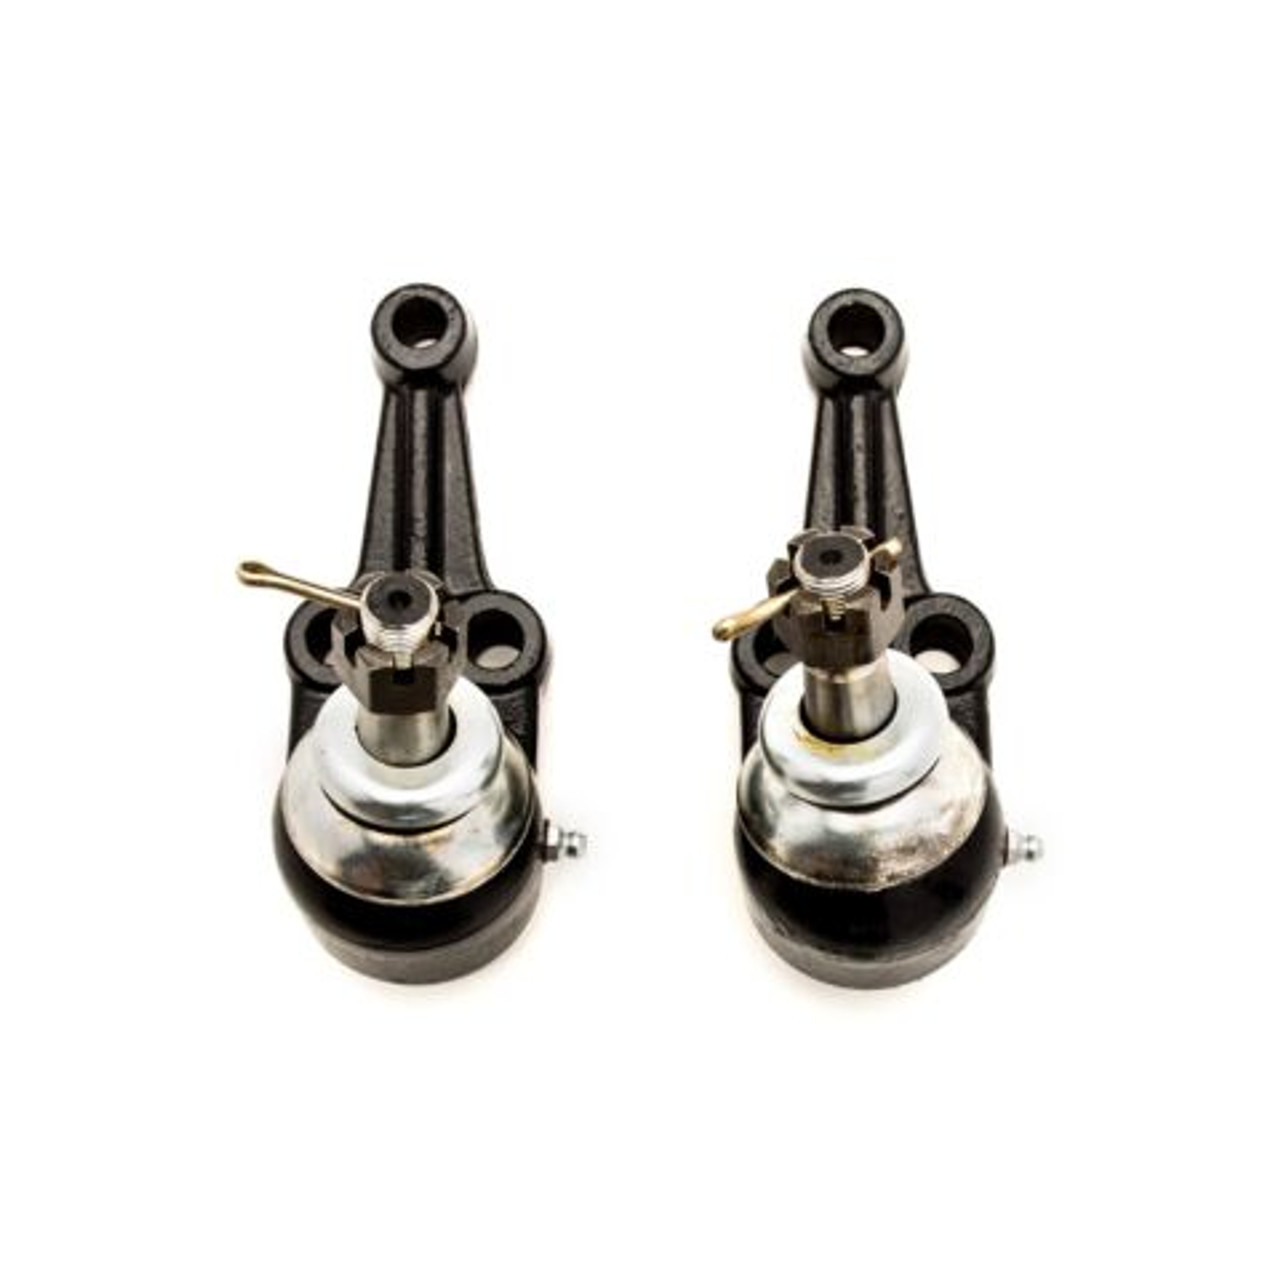 1954-1956 Ford Mercury Full Size New Upper and Lower Ball Joint Set